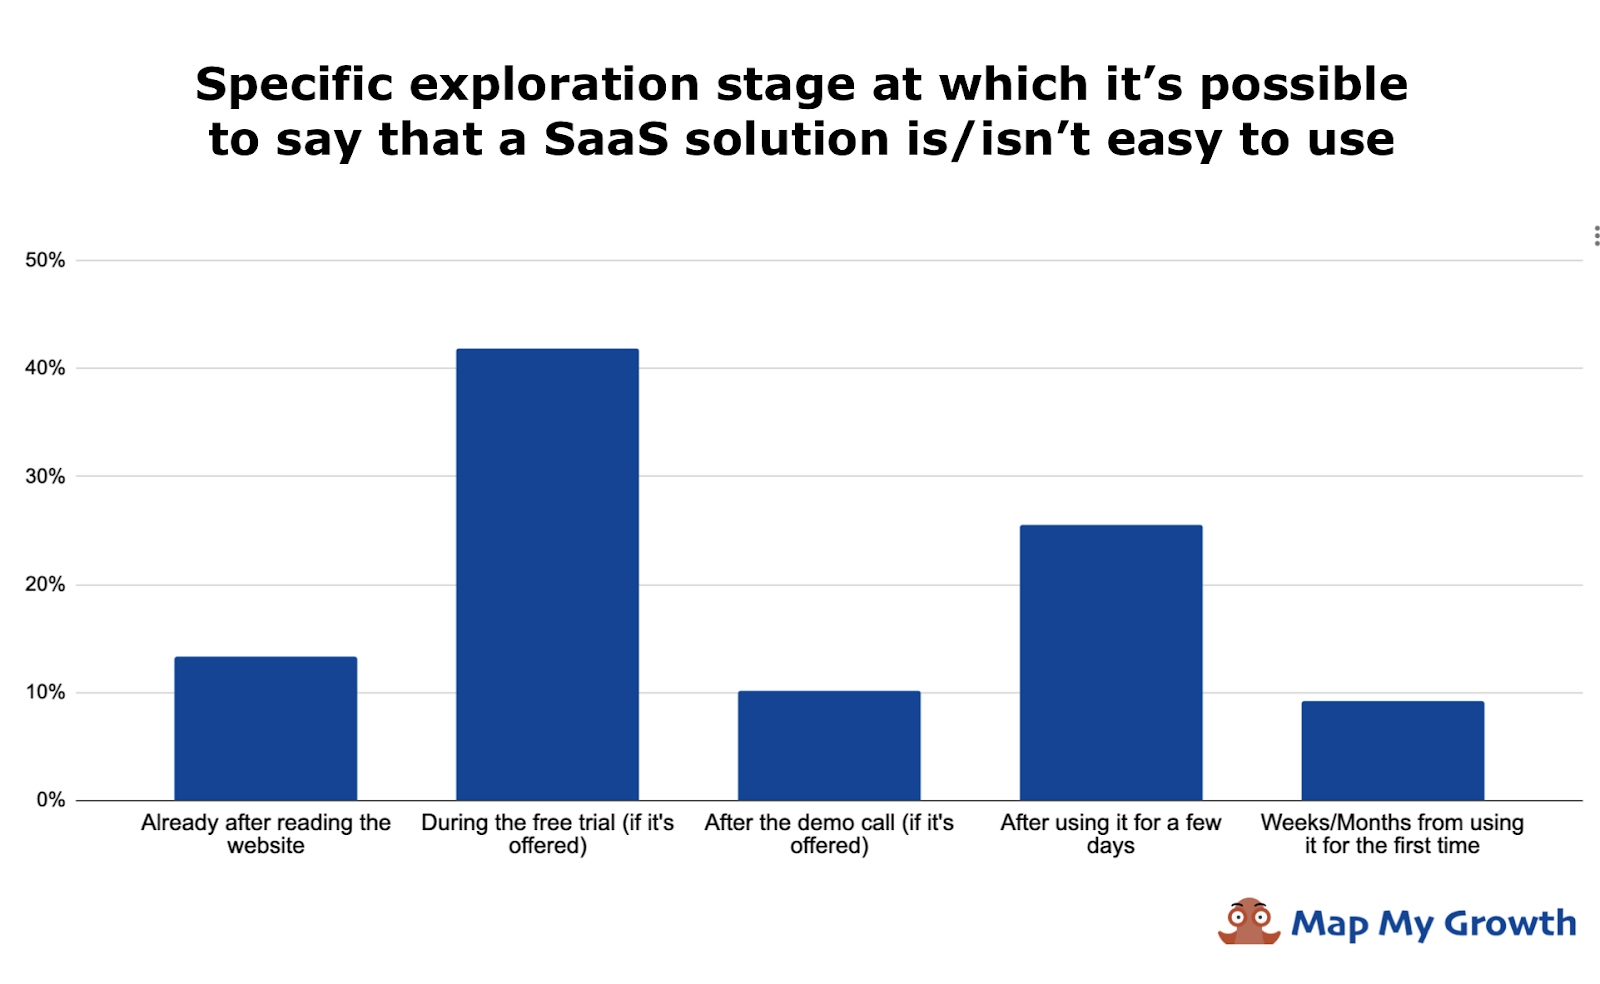 SaaS ease of use how do you tell?